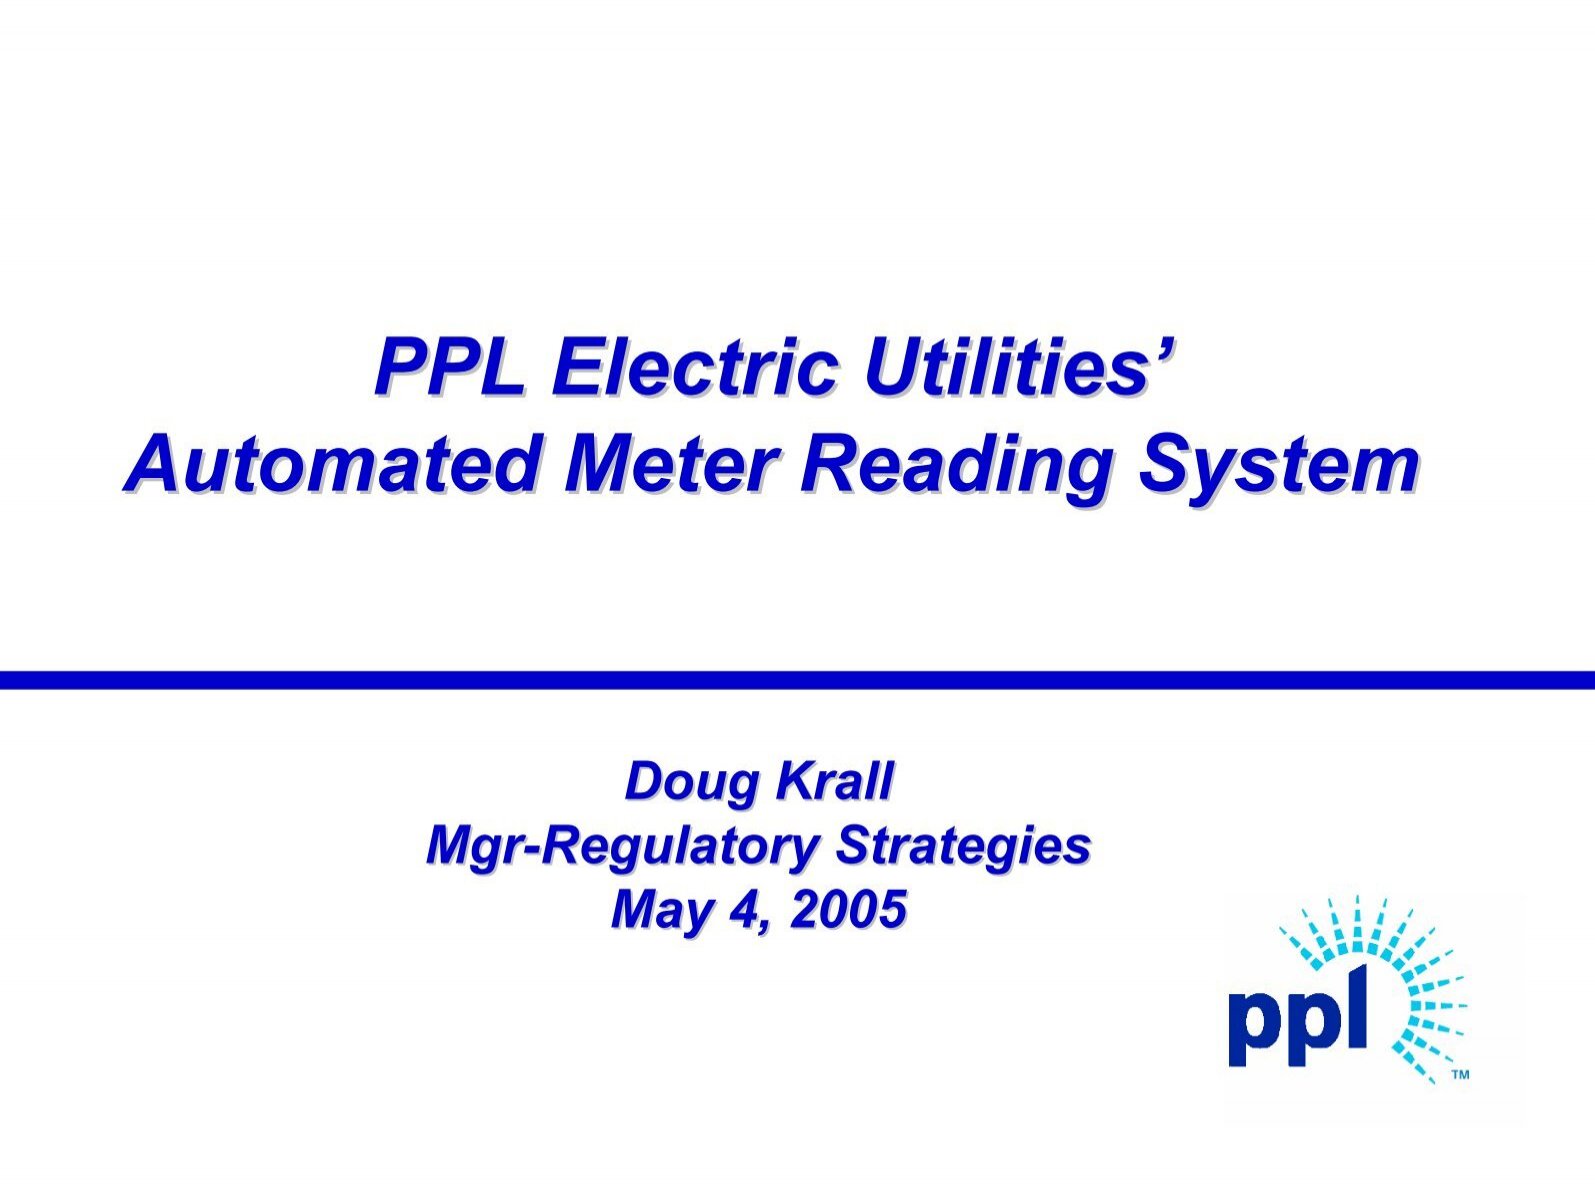 PPL Electric Utilities' Automated Meter Reading System